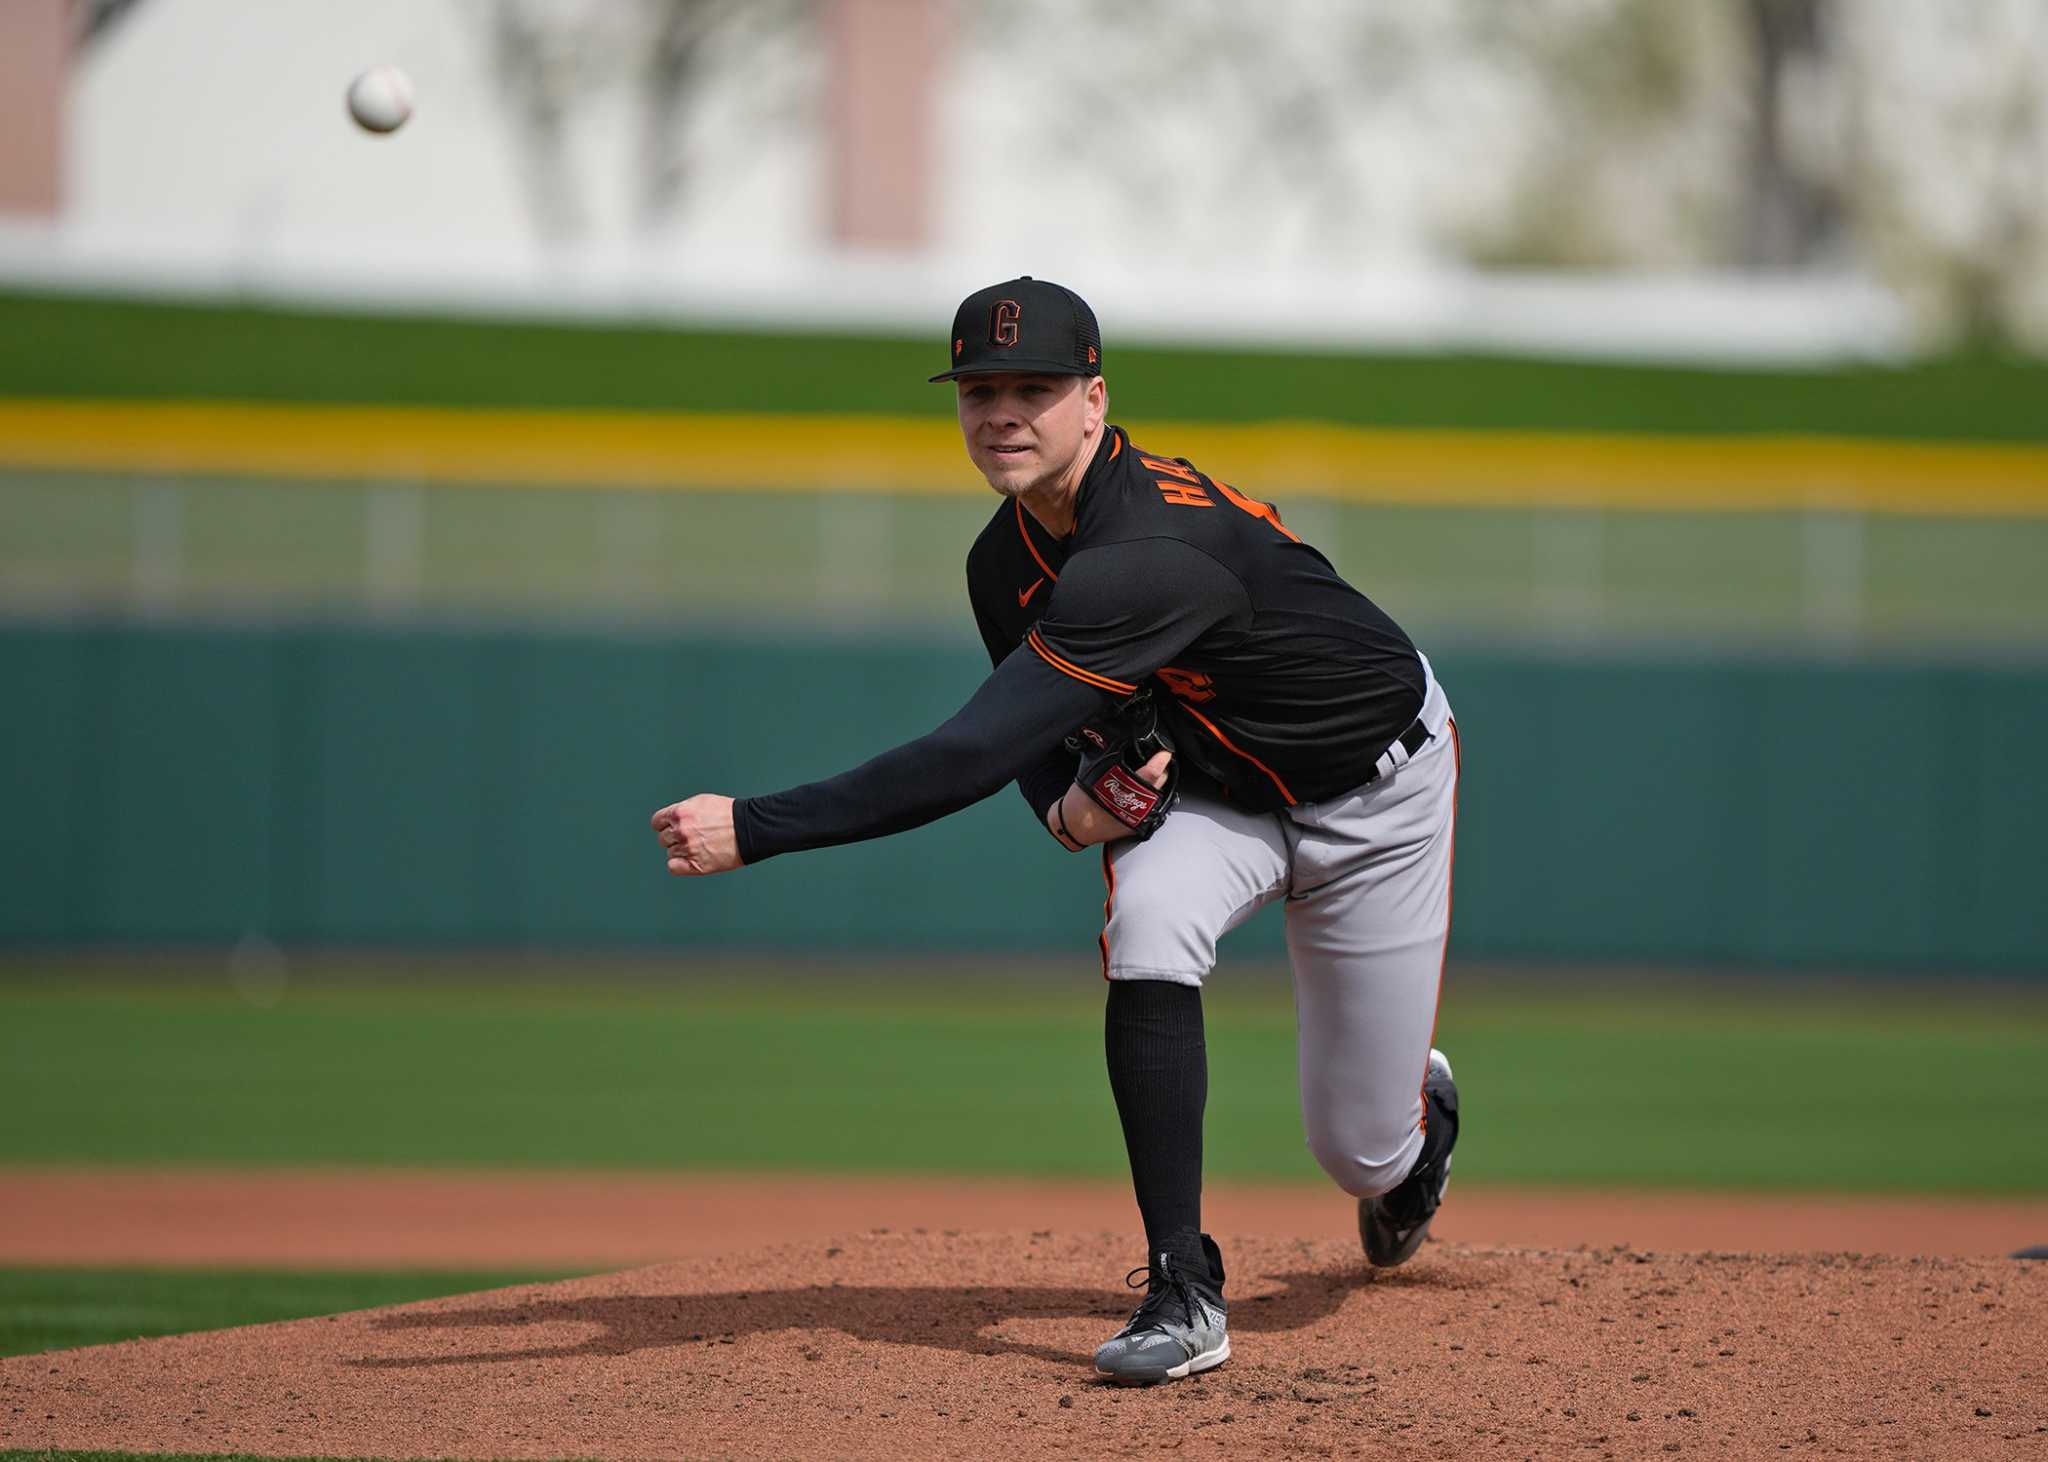 Giants Pitcher Makes MLB Debut in 1st Time Ever at Big League Ballpark